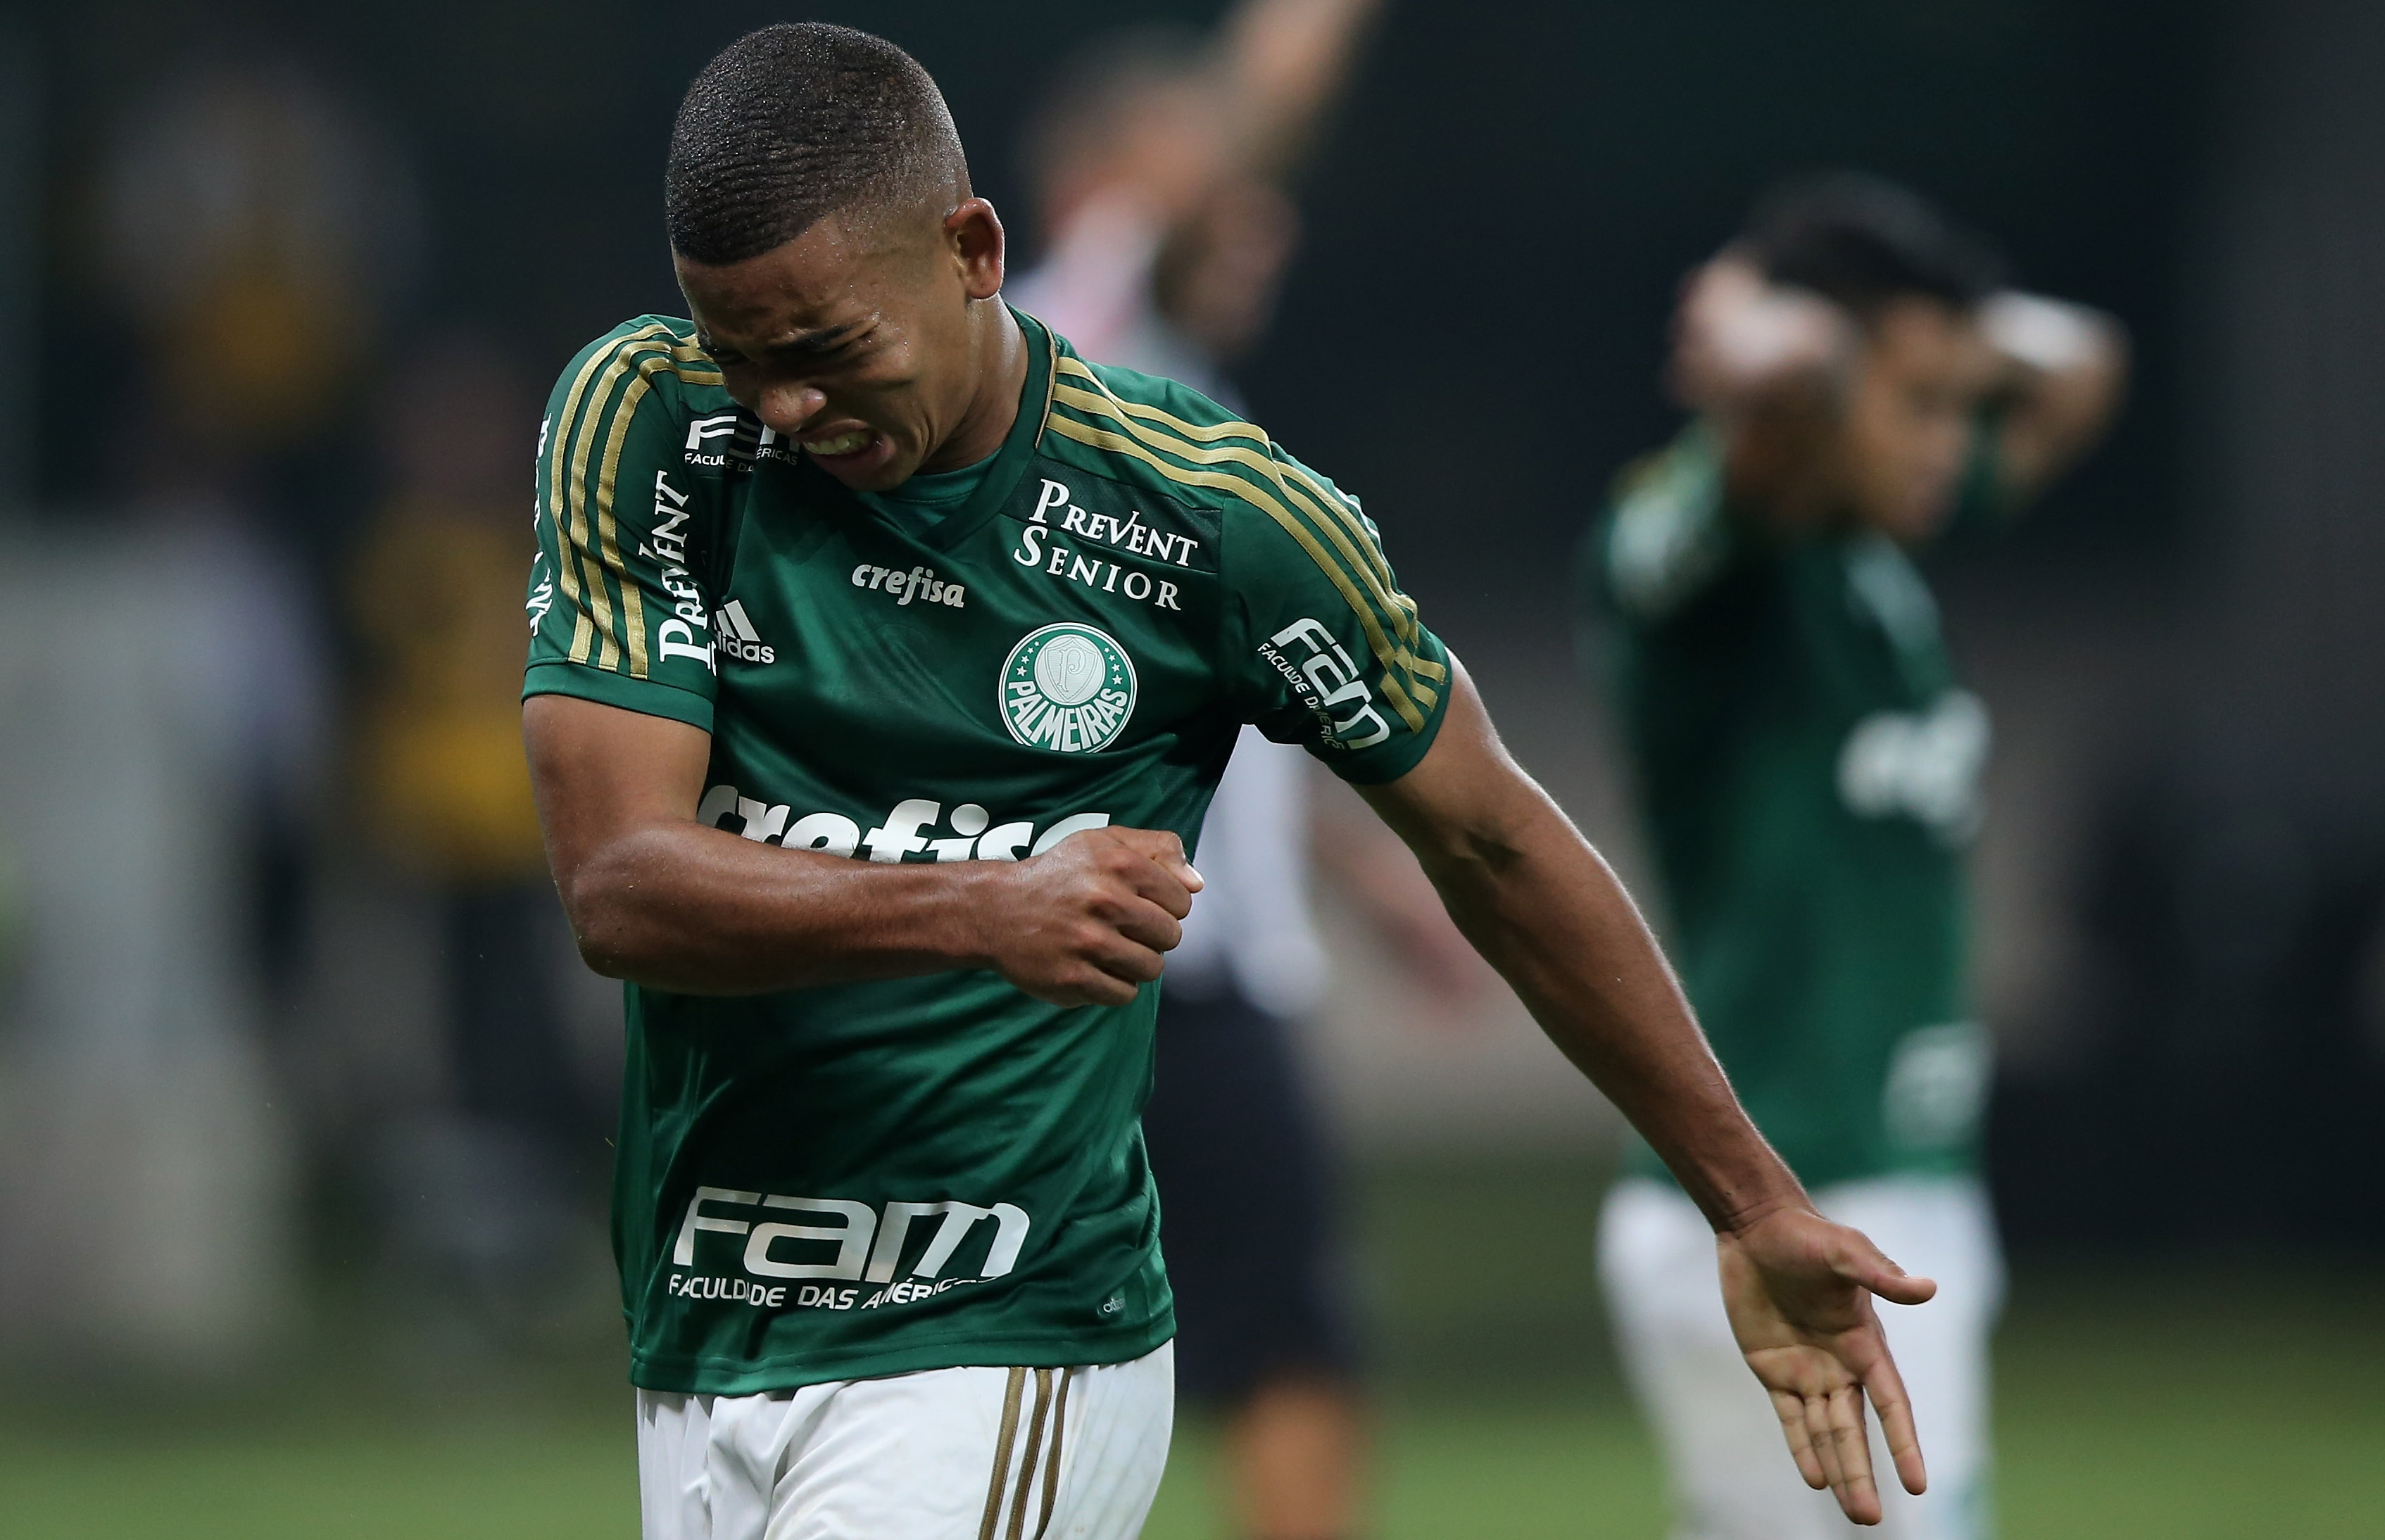 CdS: Suning to sign Gabriel Jesus as a welcome gift?